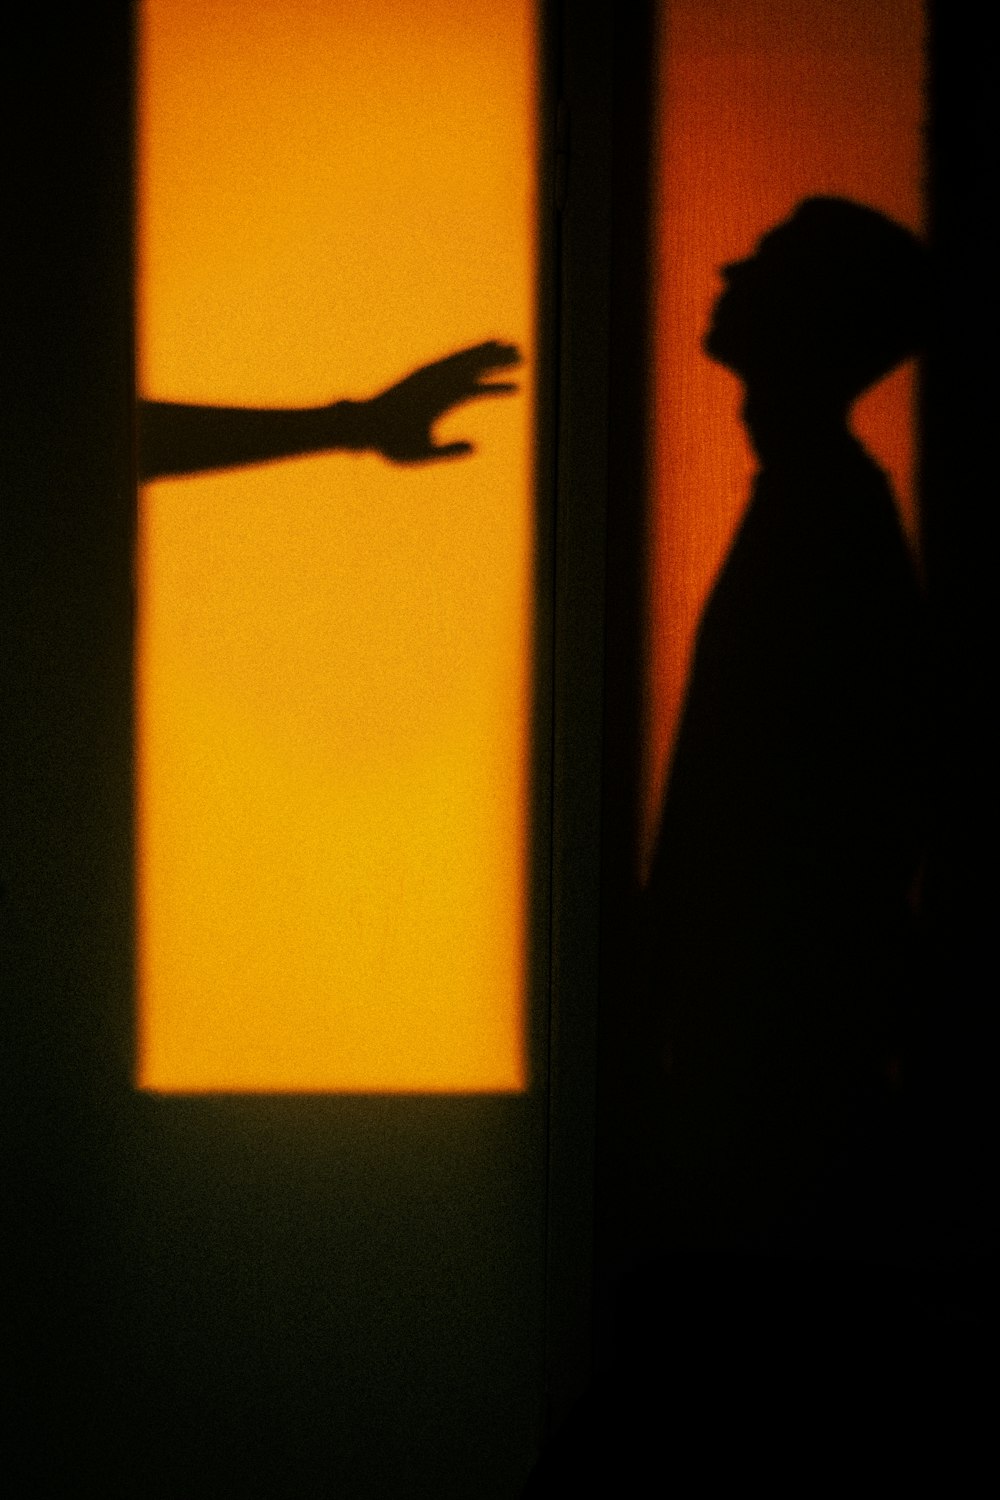 a silhouette of a person